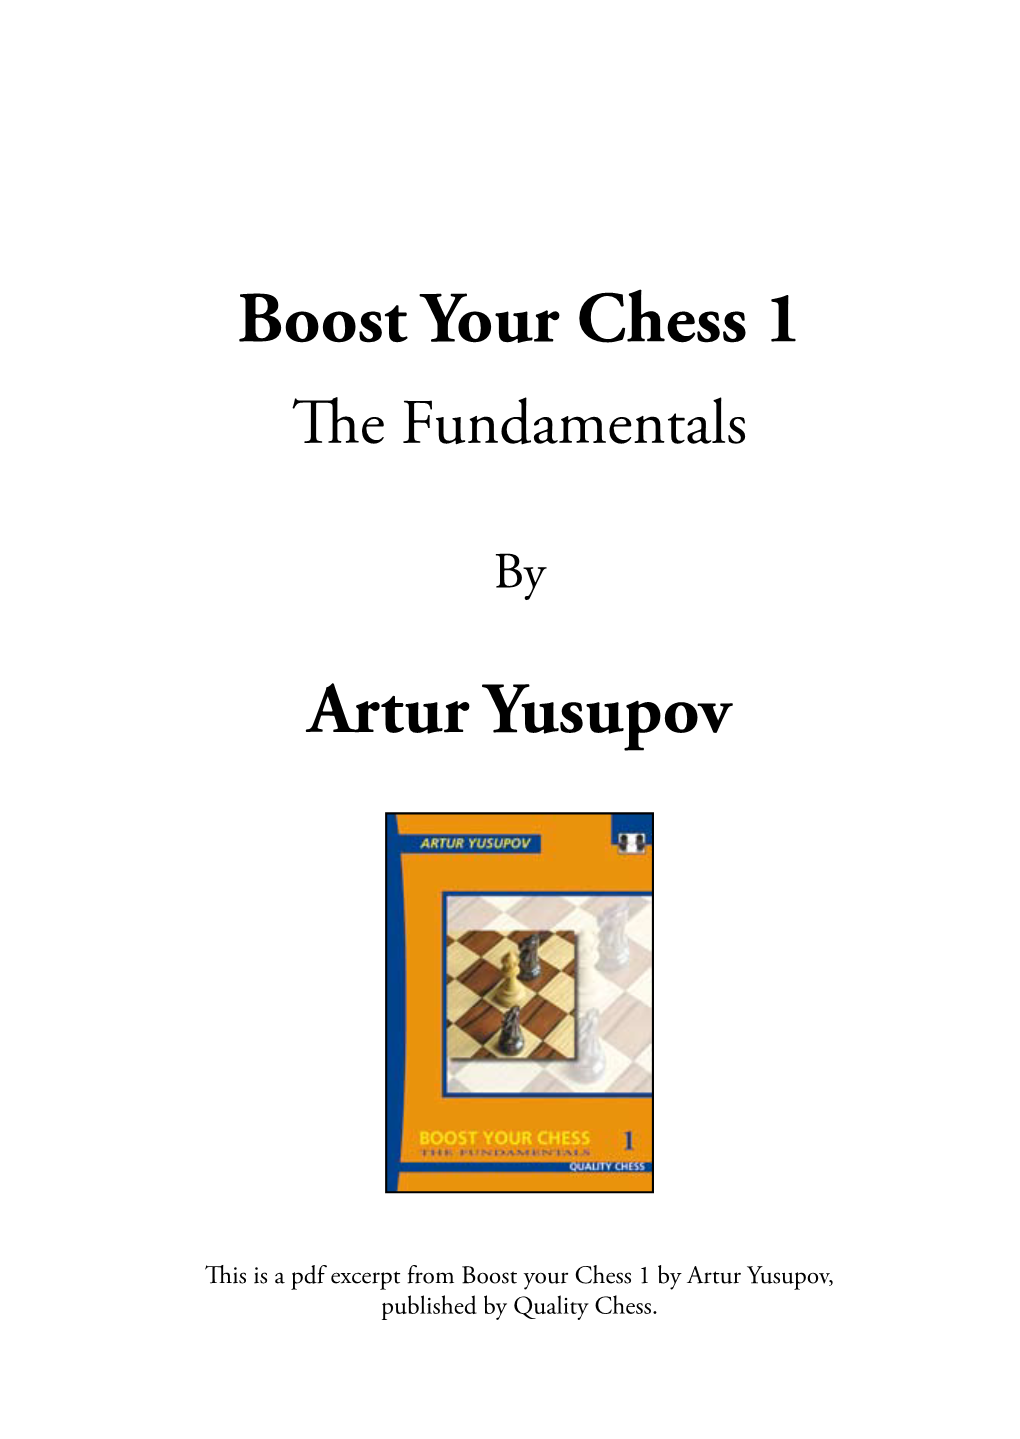 Boost-Your-Chess-1-Excerpt.Pdf